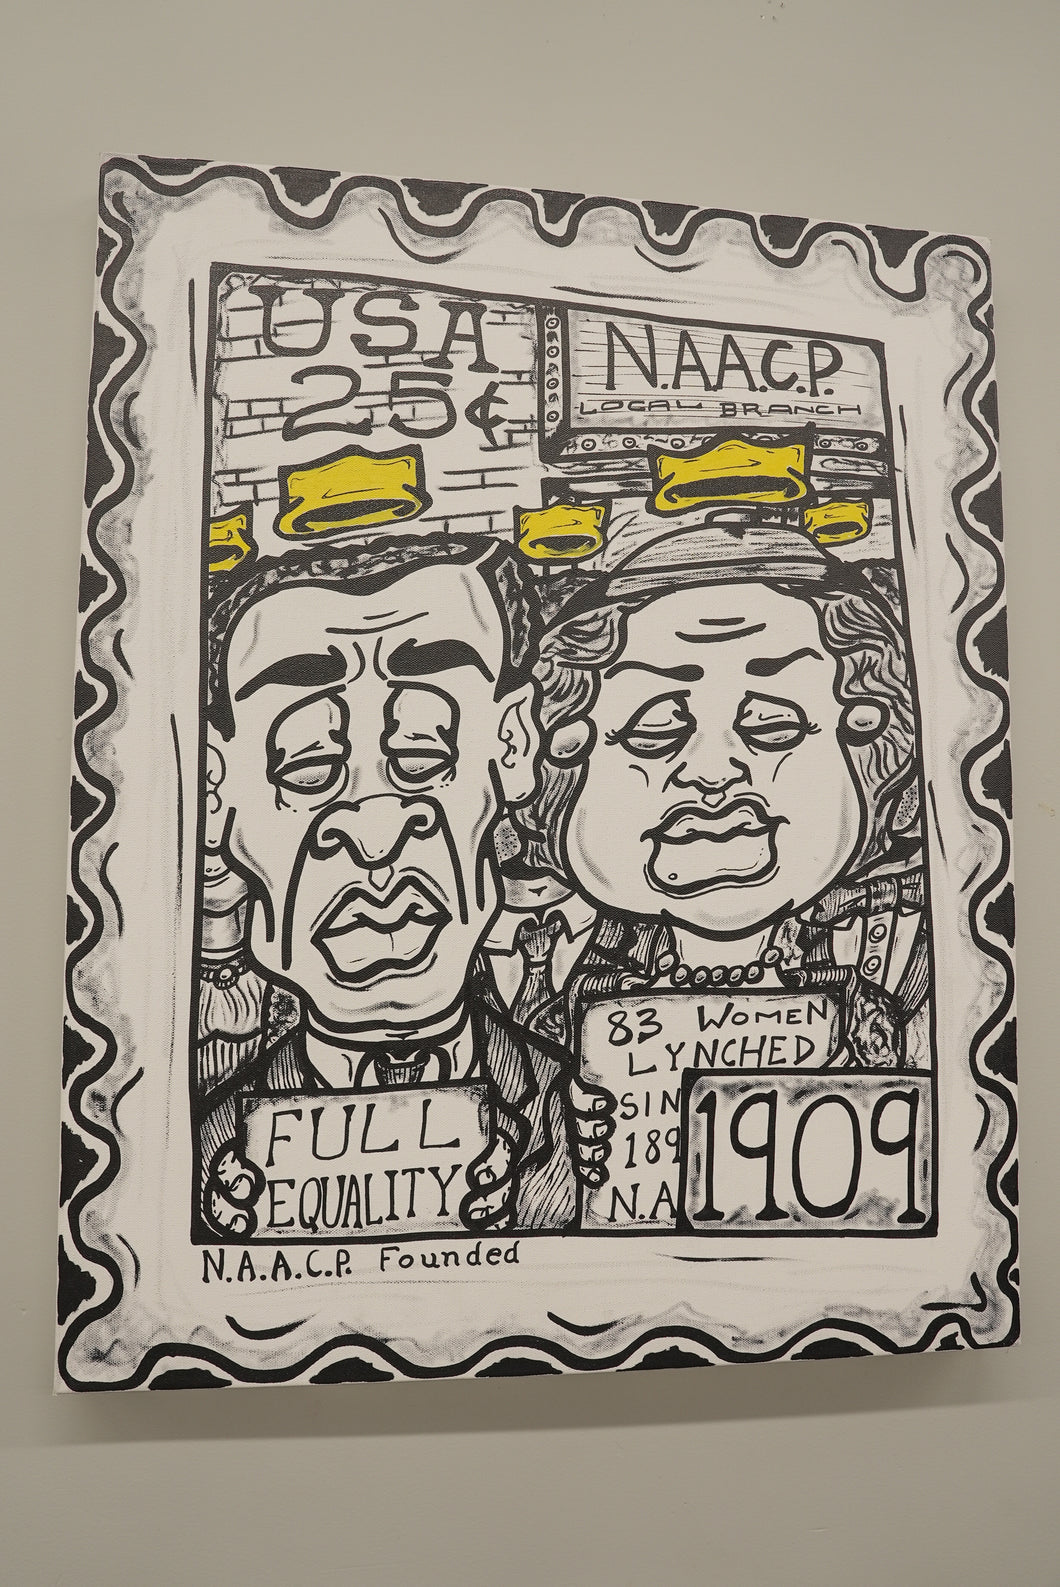 “1909: N.A.A.C.P. Founded”